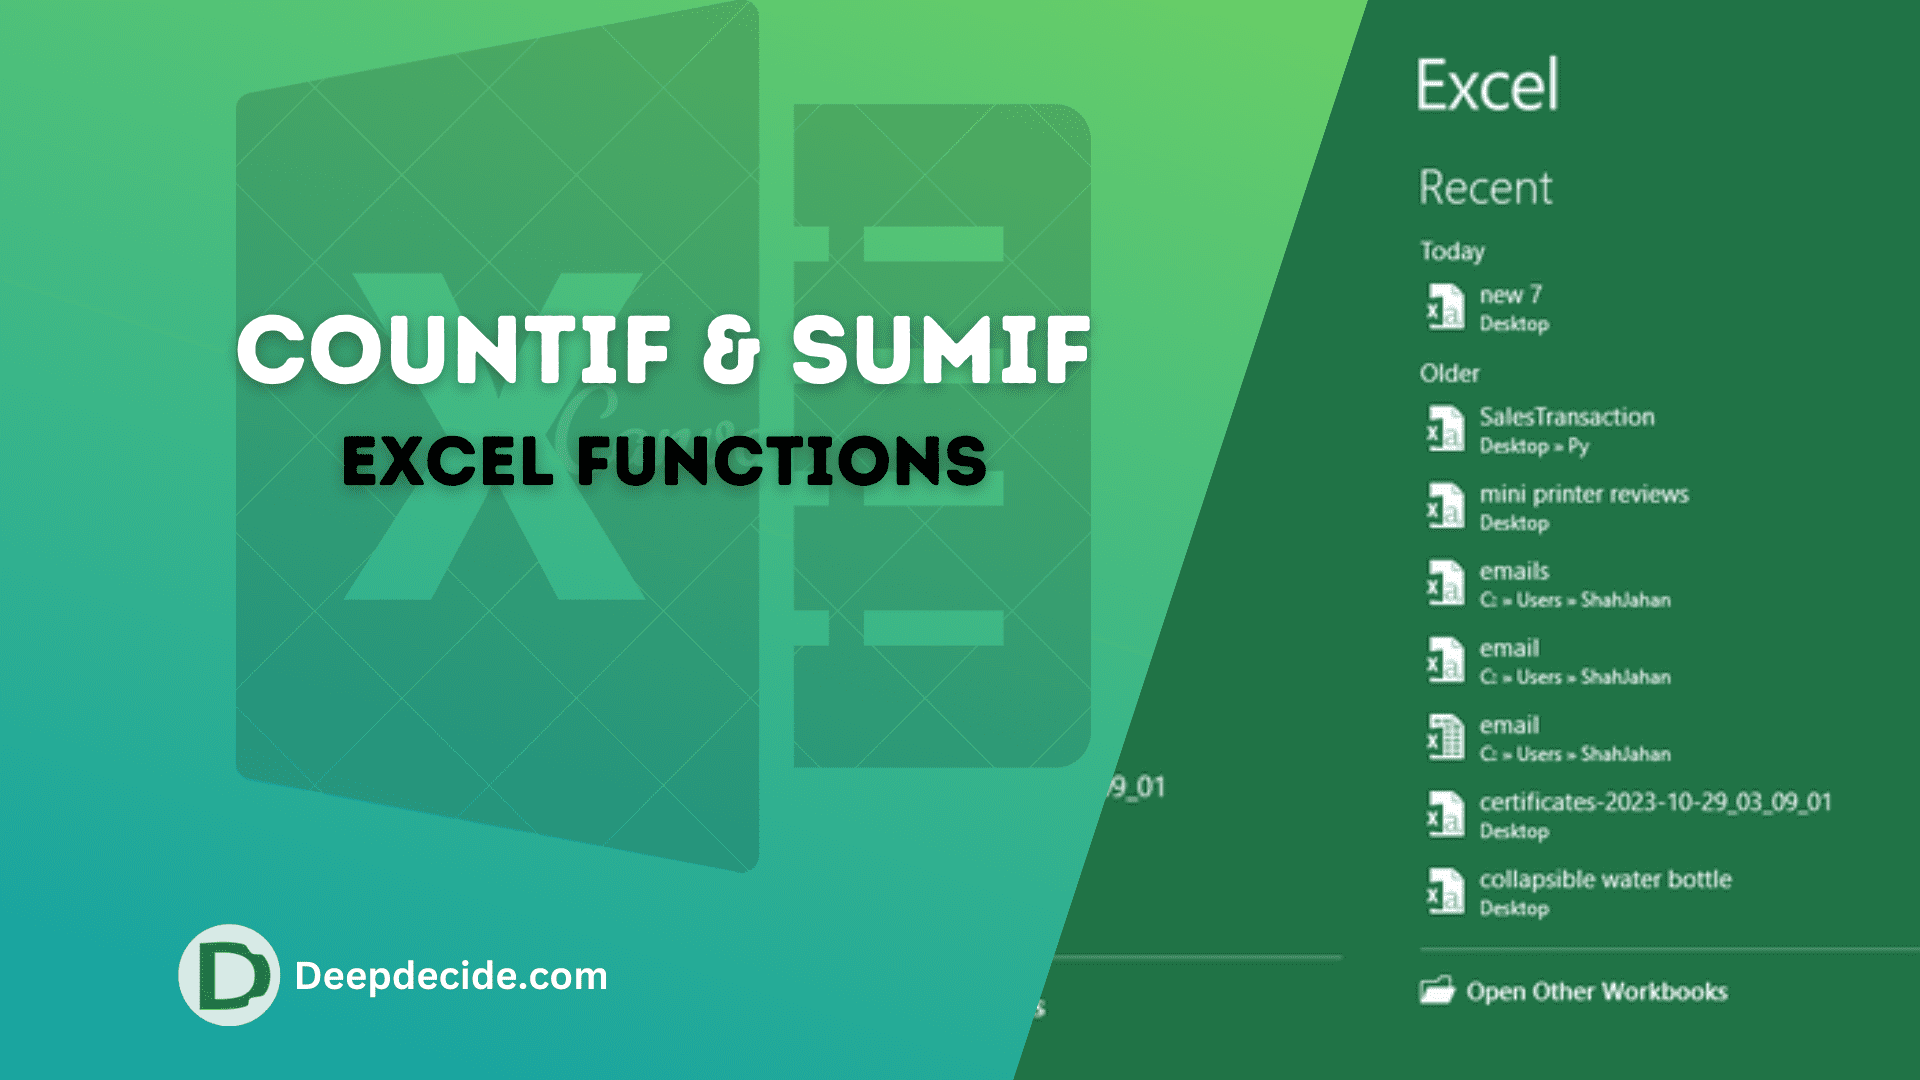 COUNTIF and SUMIF Excel function